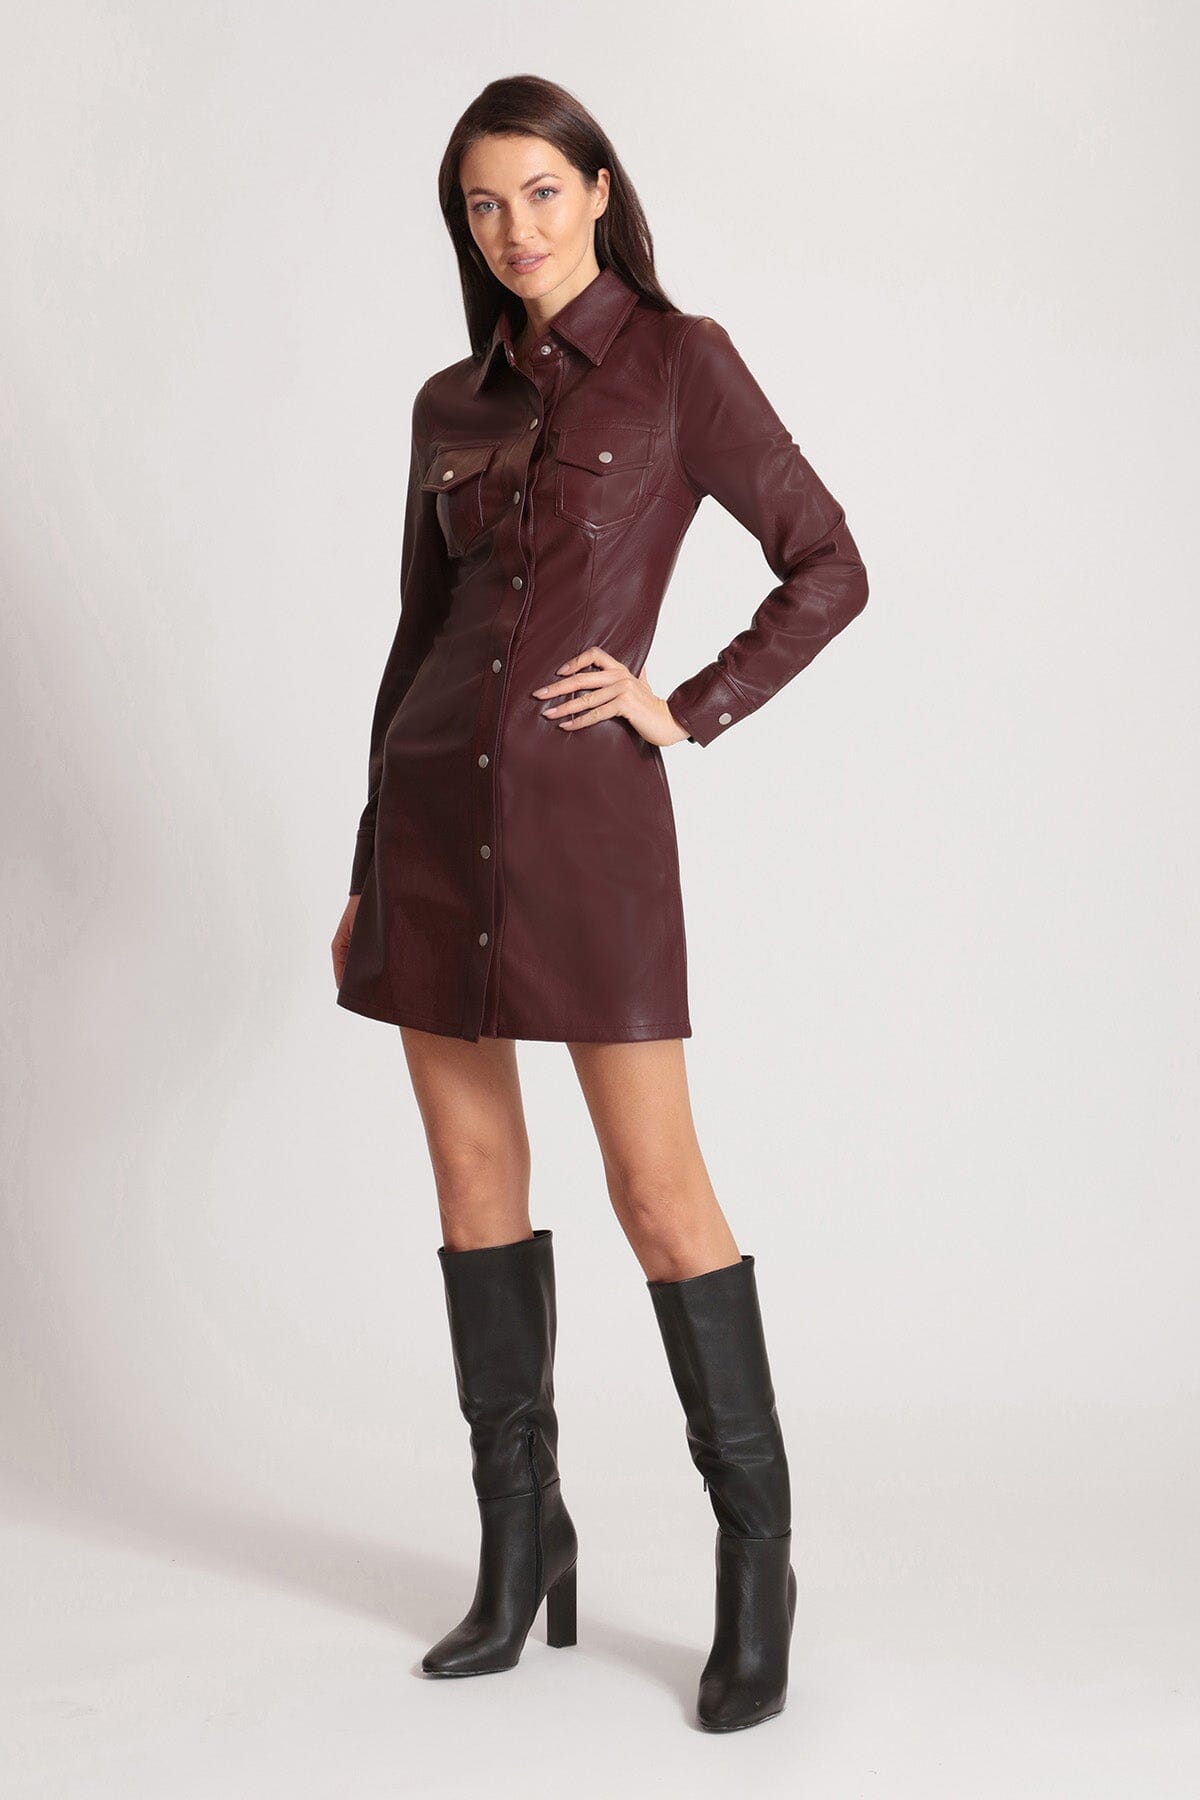 Dark red figure flattering faux ever leather long sleeve shirtdress dress dresses for women by Avec Les Filles